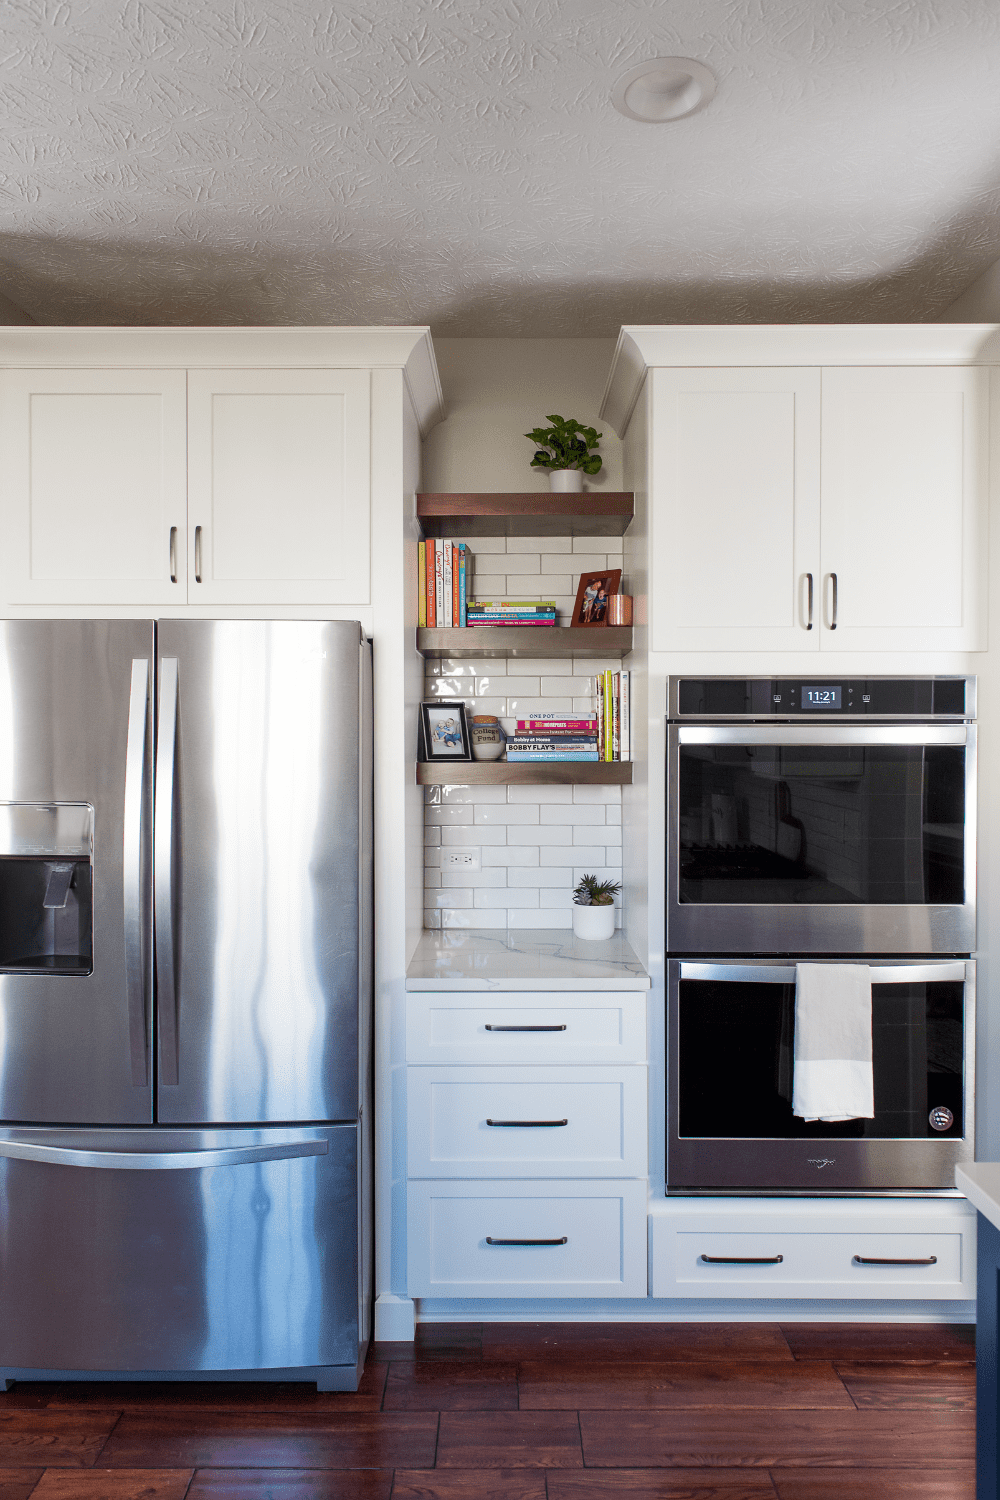 Nicholas Design Build | A white kitchen with a stainless steel refrigerator and oven.